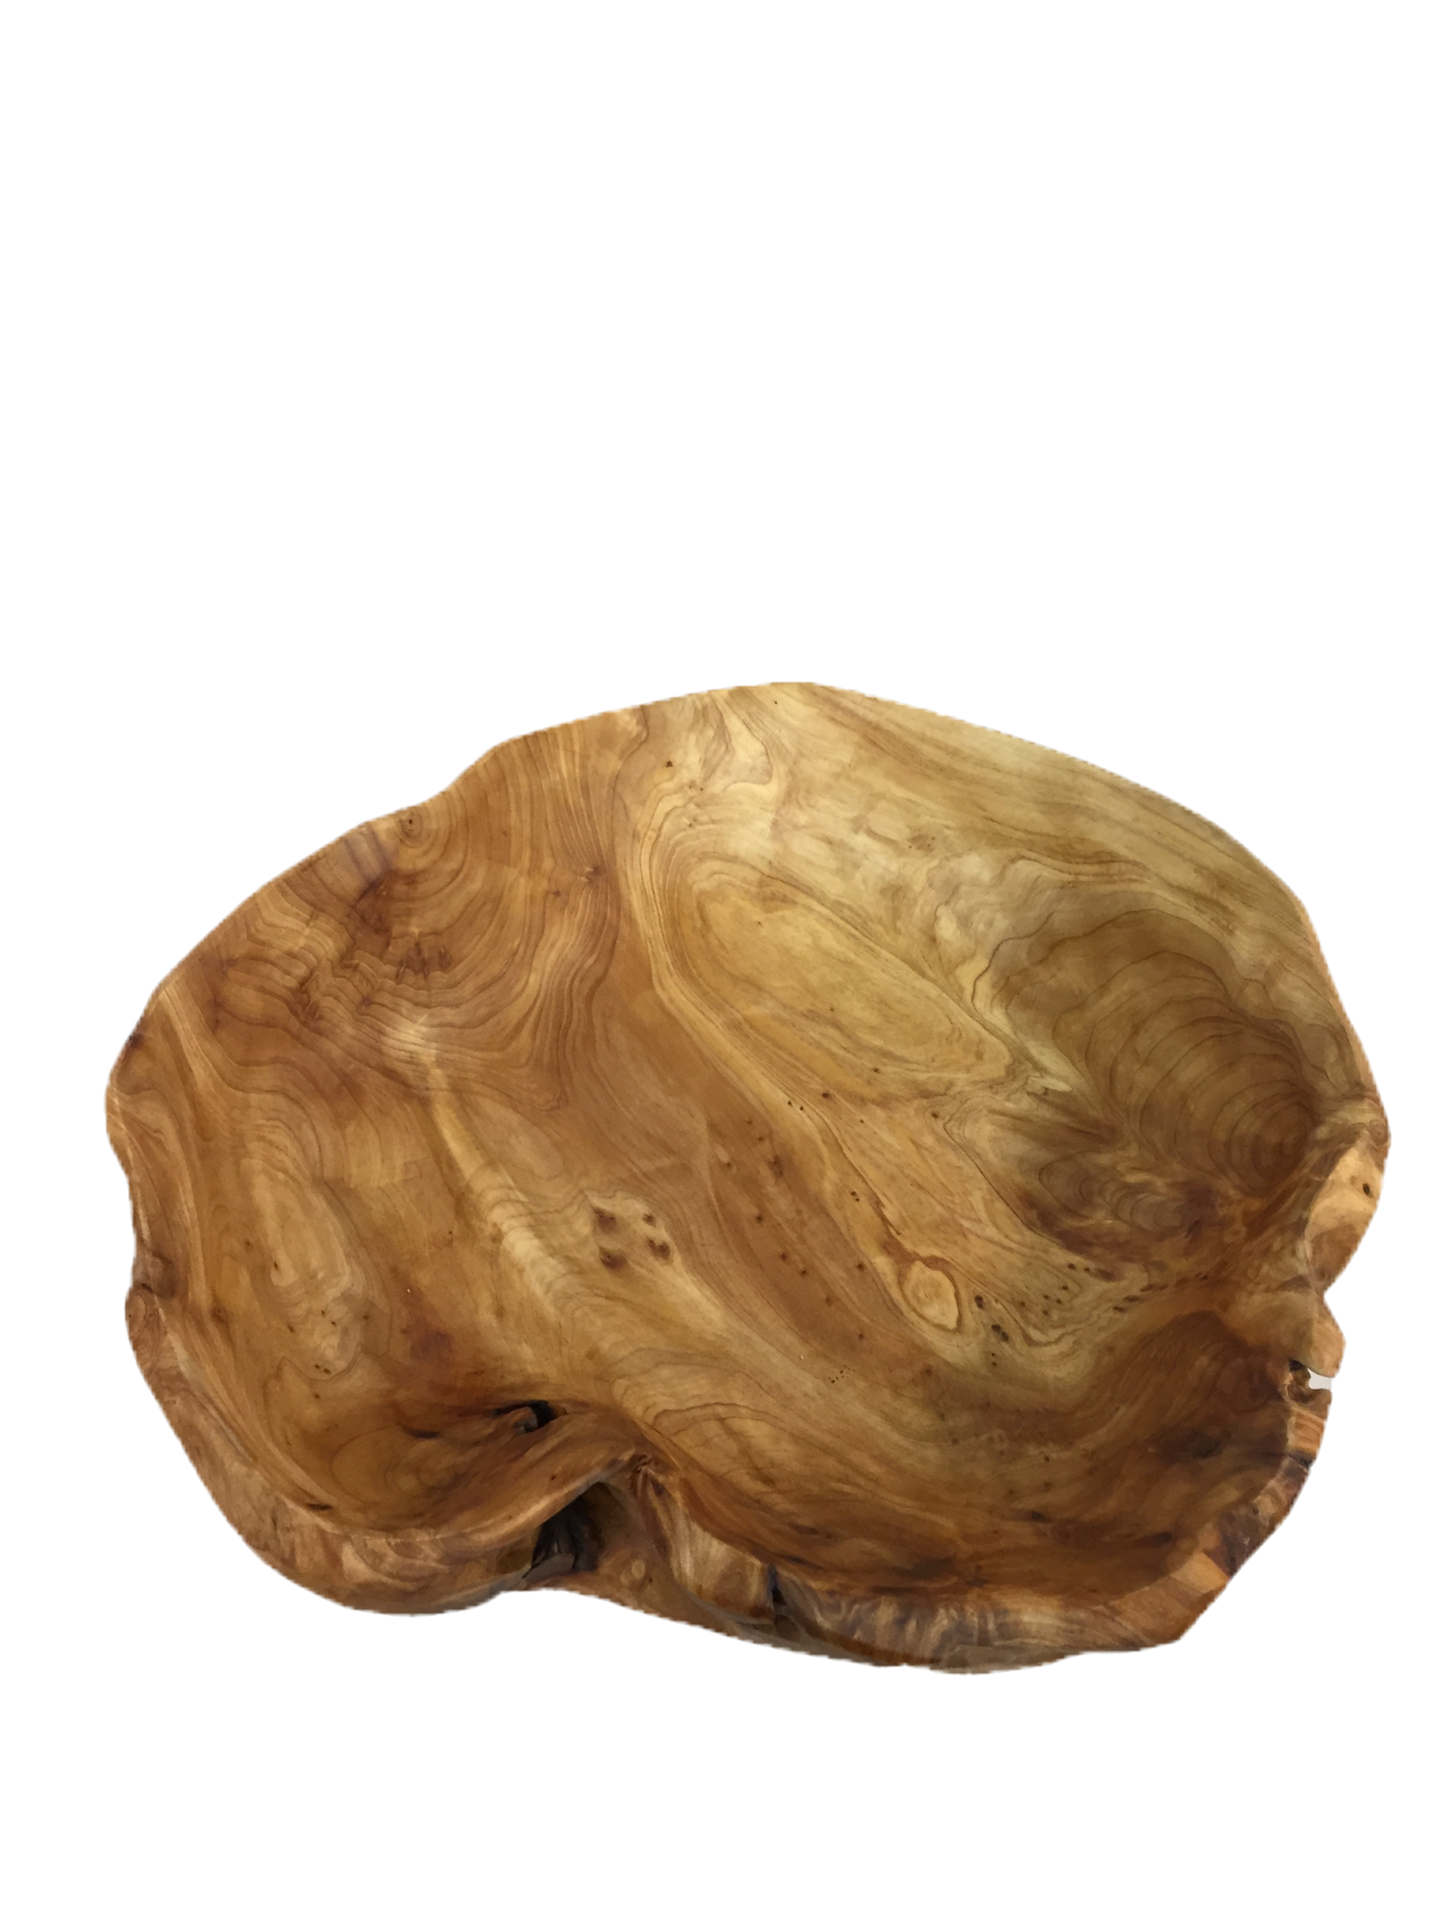 Hand-Crafted Root Wood Live Edge Bowl - Medium Small (10-11" / 3-4")